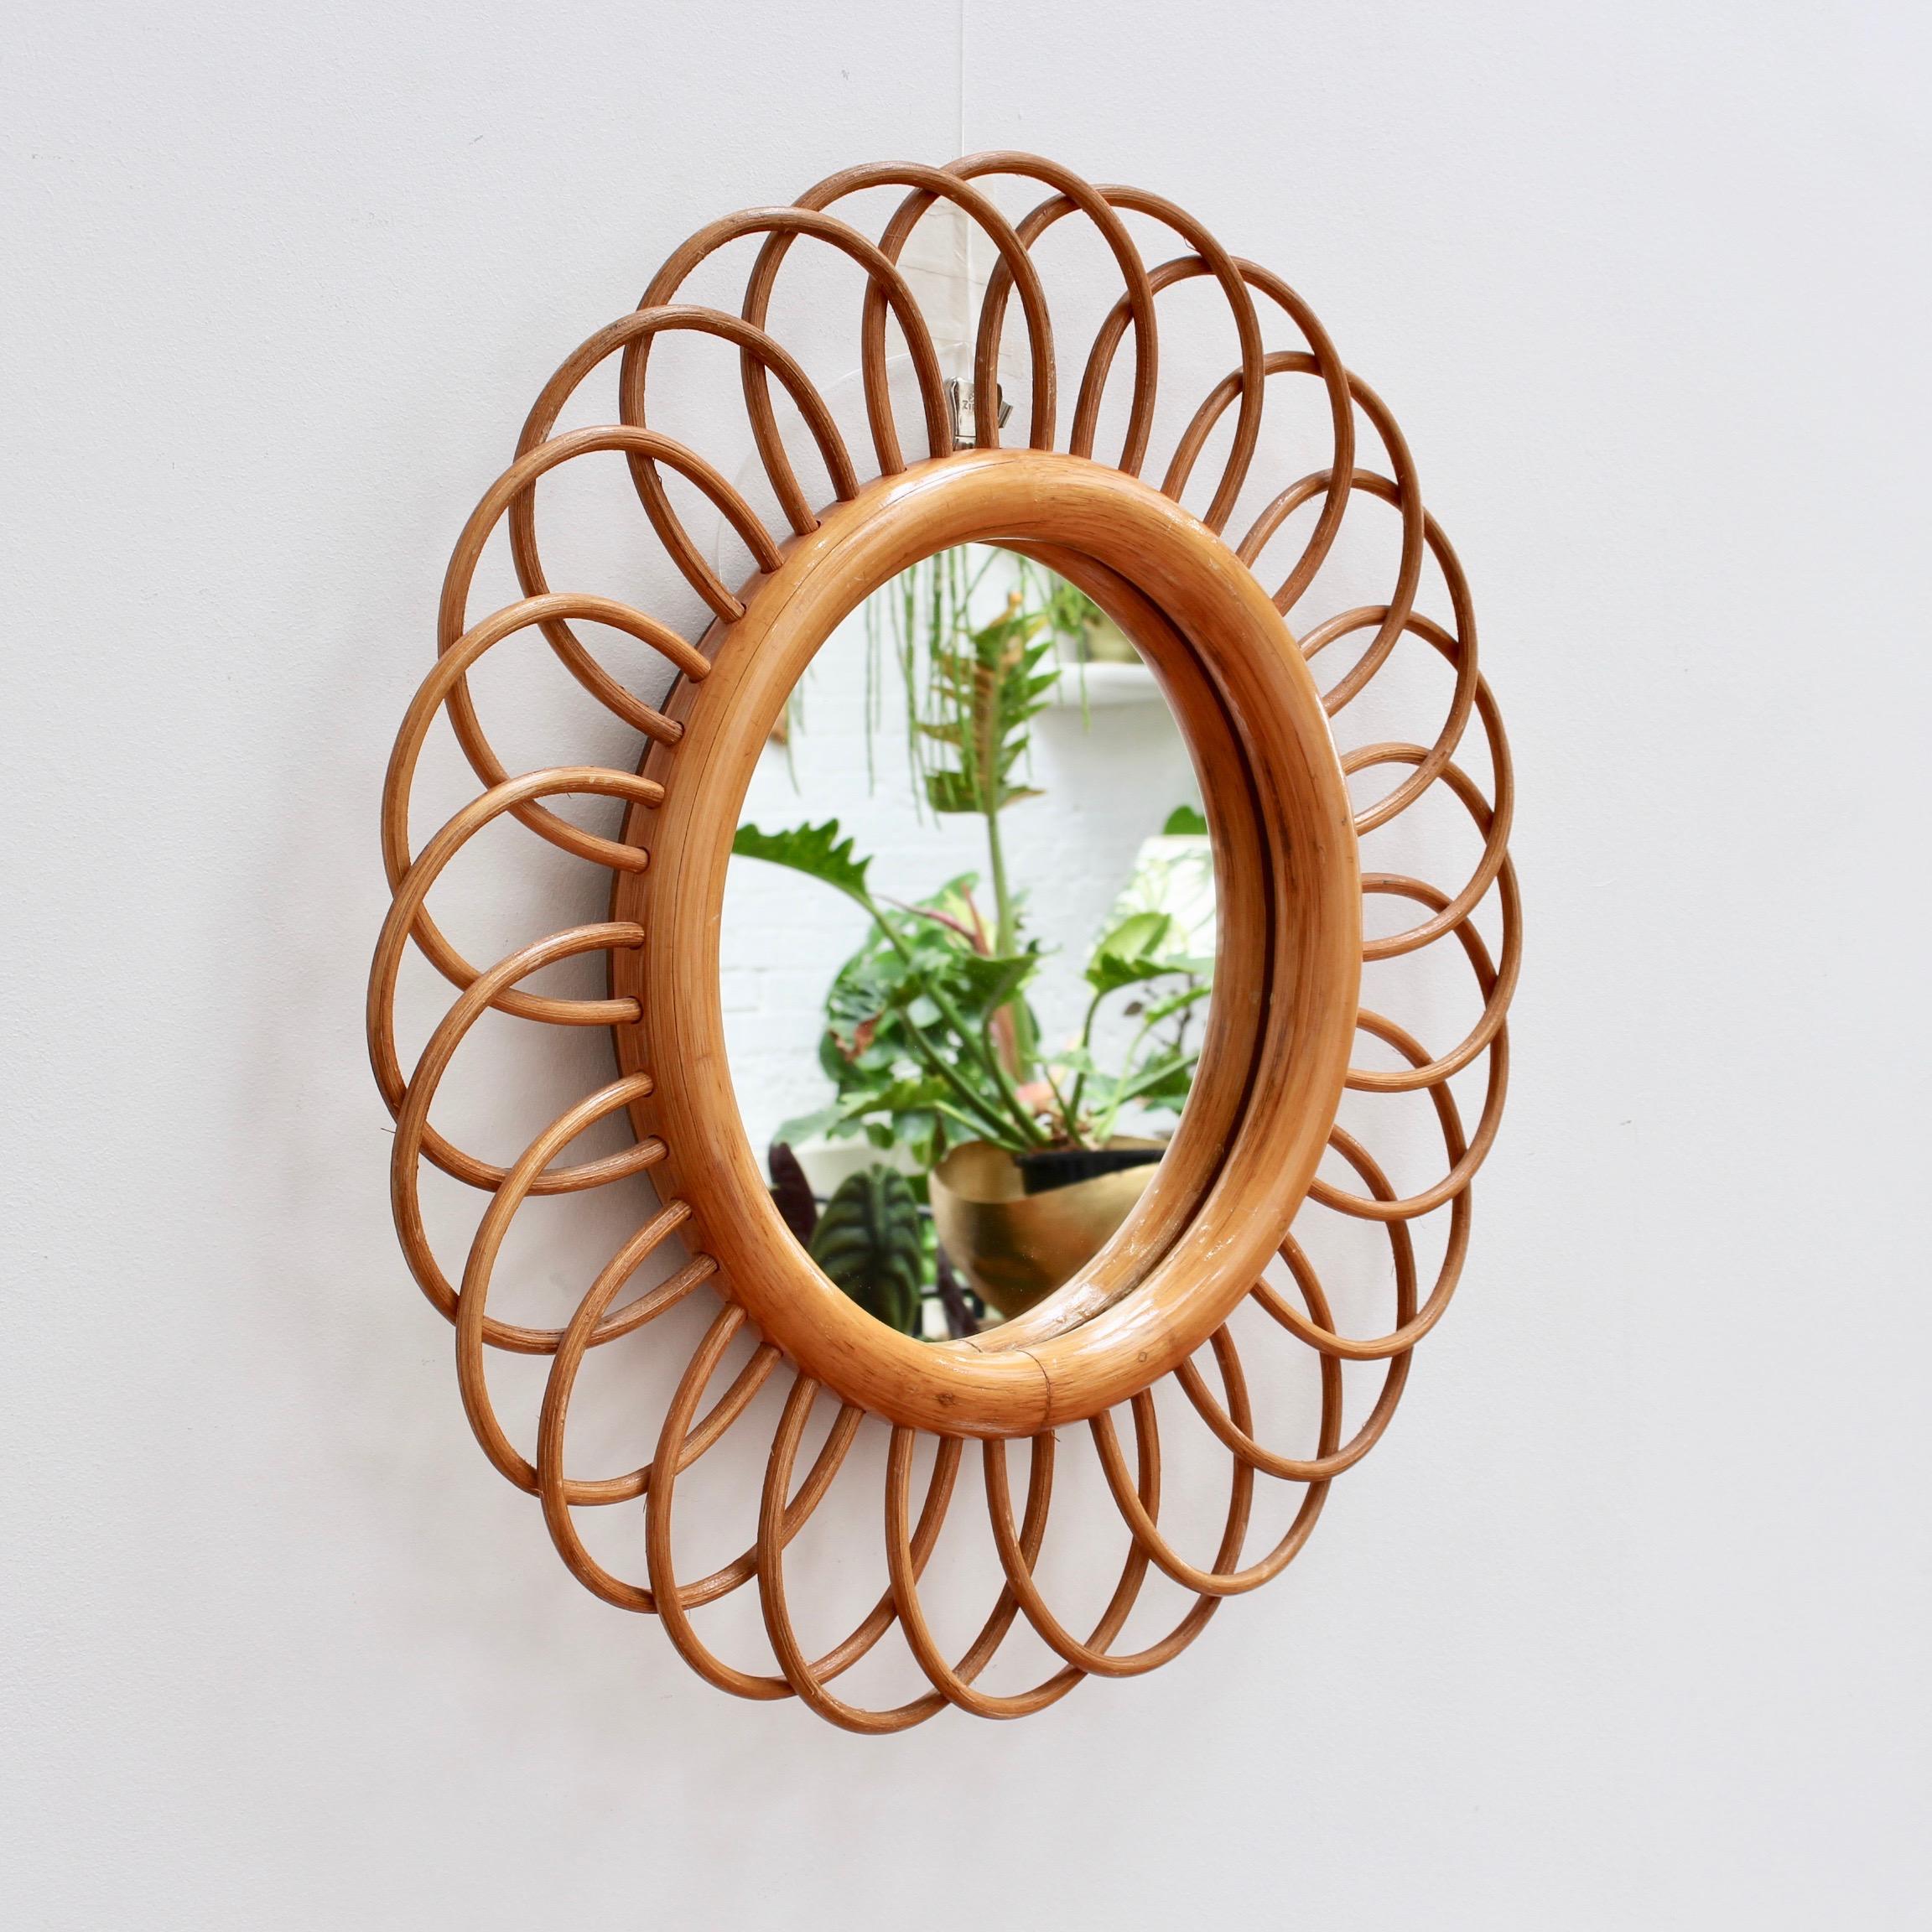 Midcentury French rattan flower-shaped wall mirror, circa 1960s. Charming, uplifting, stylish and very collectible, this mirror is in excellent condition. Upon request a video of this piece will be provided. 

Dimensions:
Dia with frame: 50 cm /